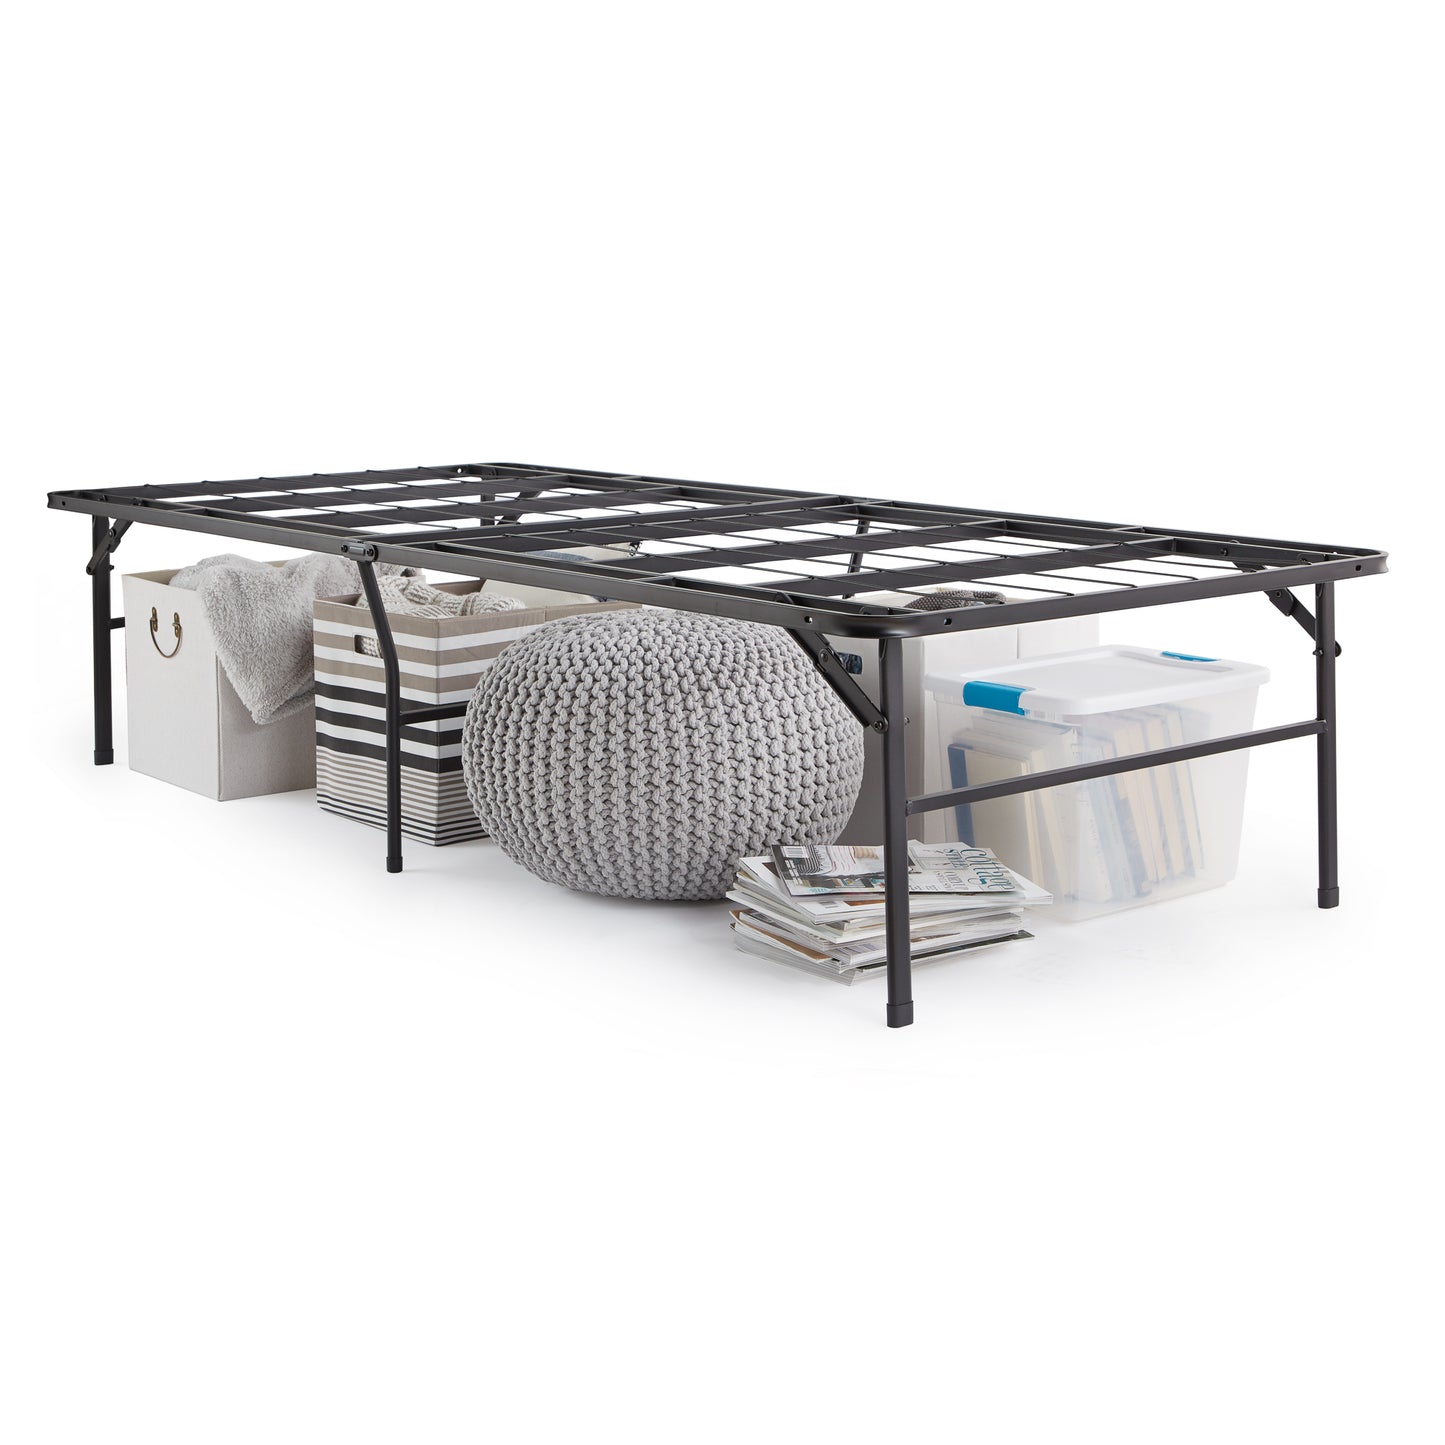 18" QUEEN Highrise Bed Frame